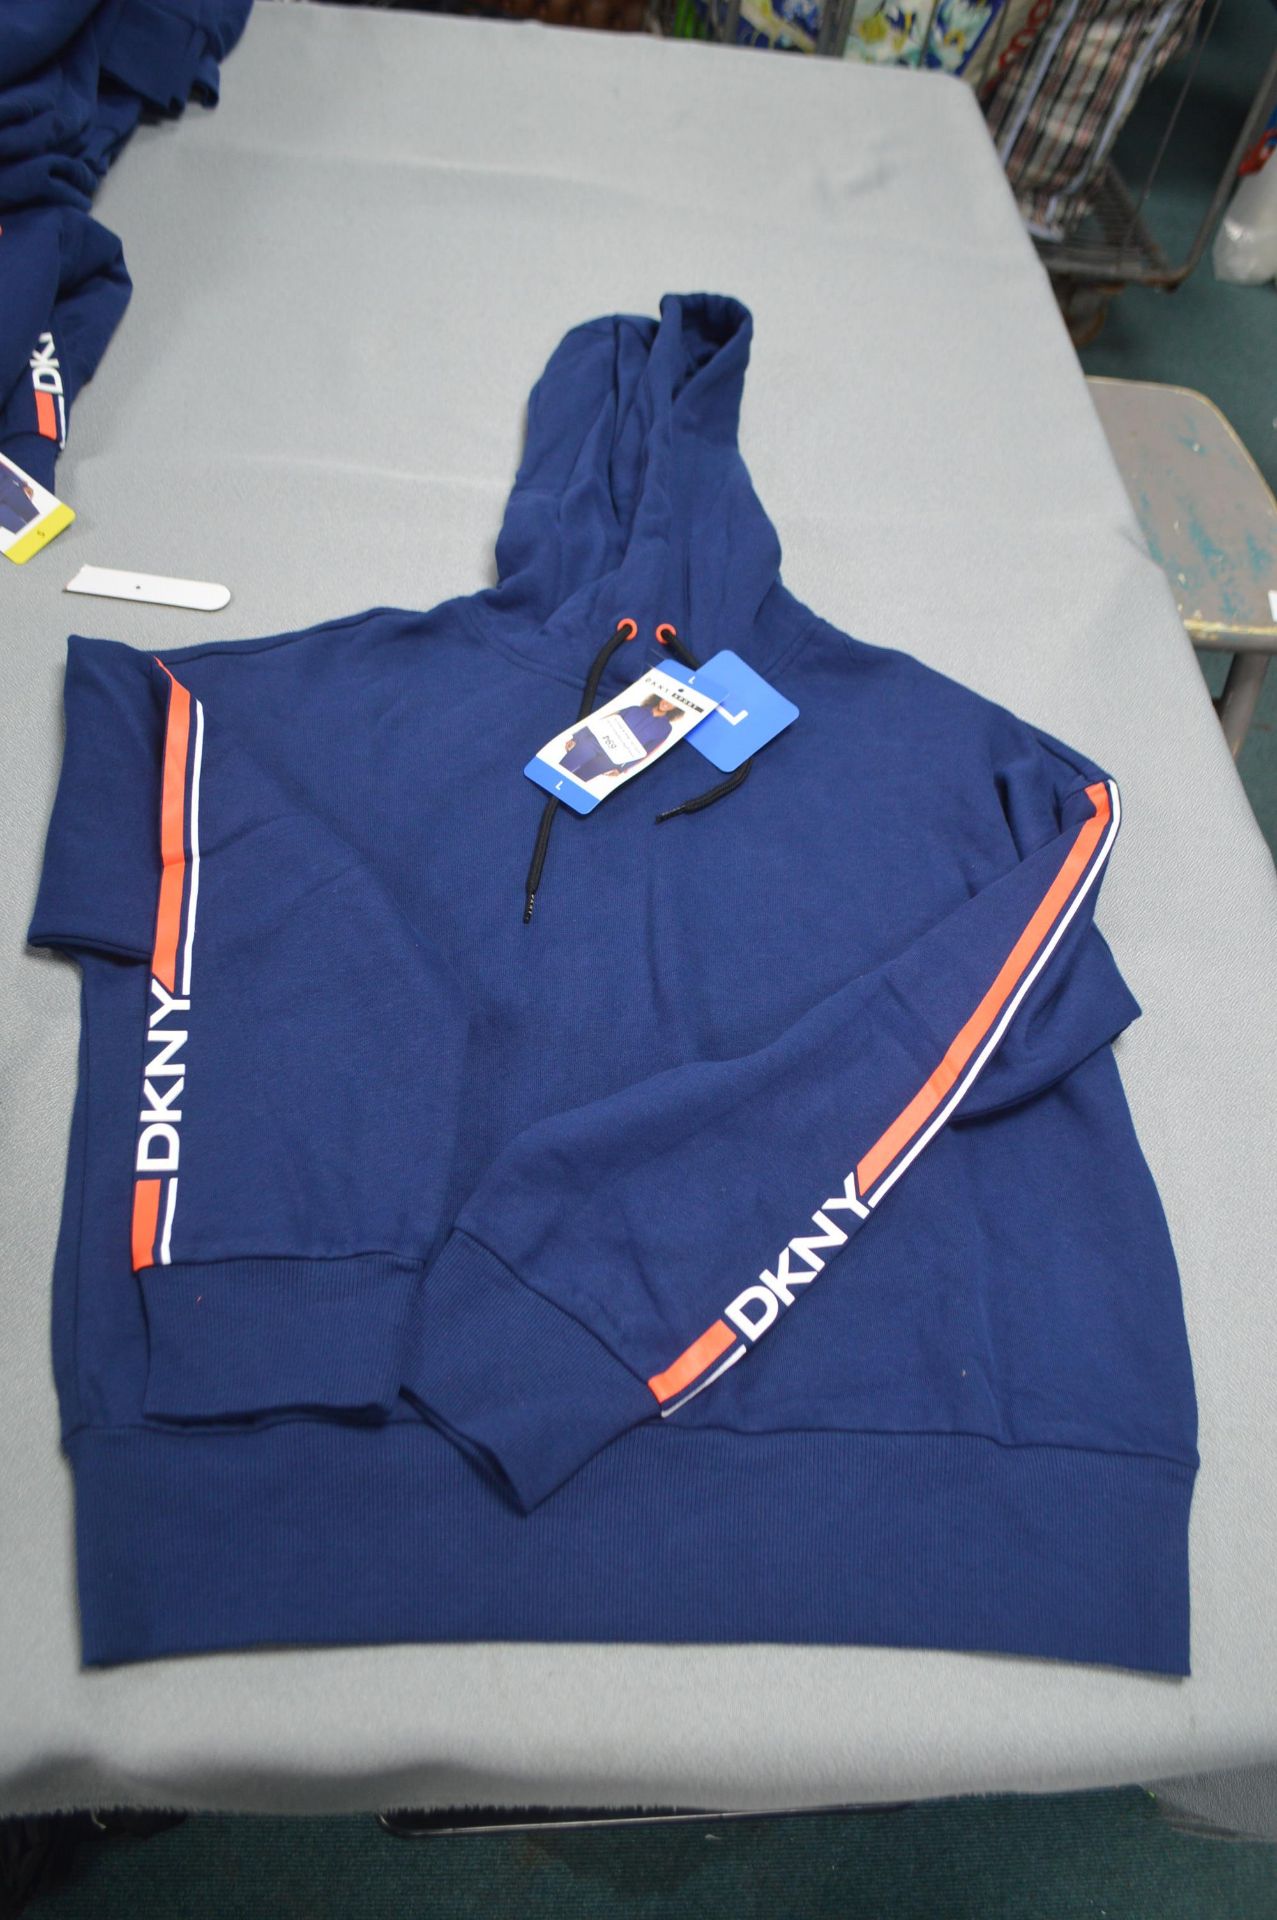 *DKNY Sports Hoodie in Navy Size: L